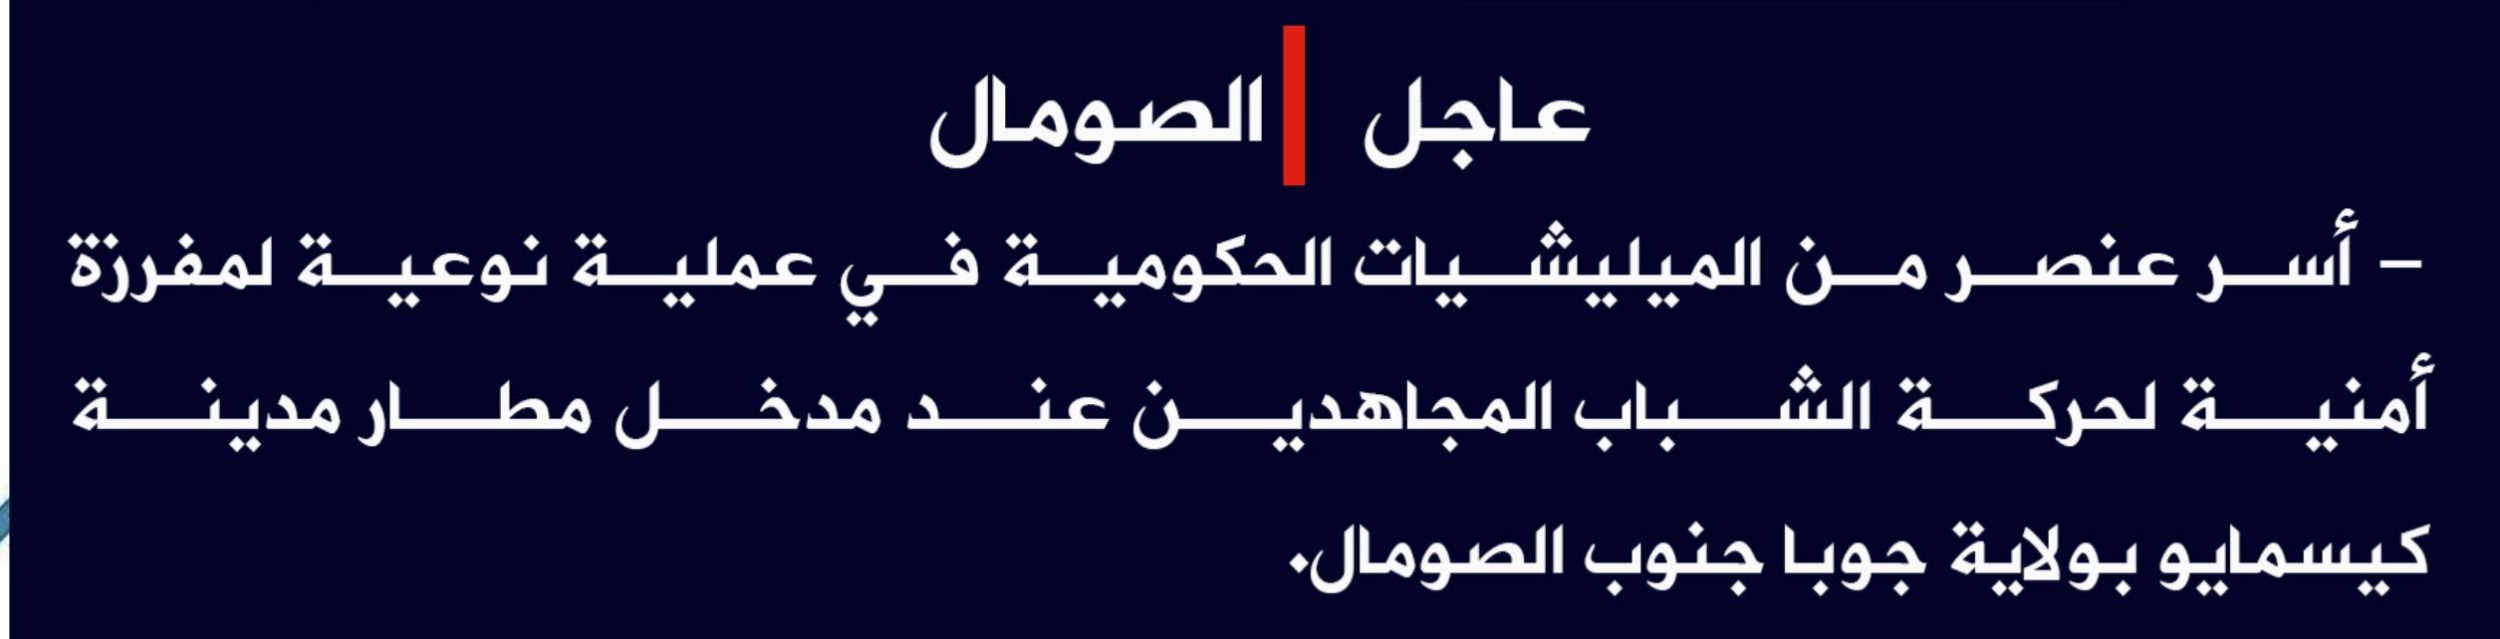 (Claim) al-Shabaab: A Somalian Army Element Was Captured in an Attack at the Entrance of Kismayo Airport, Juba State, Southern Somalia - 21 May 2022